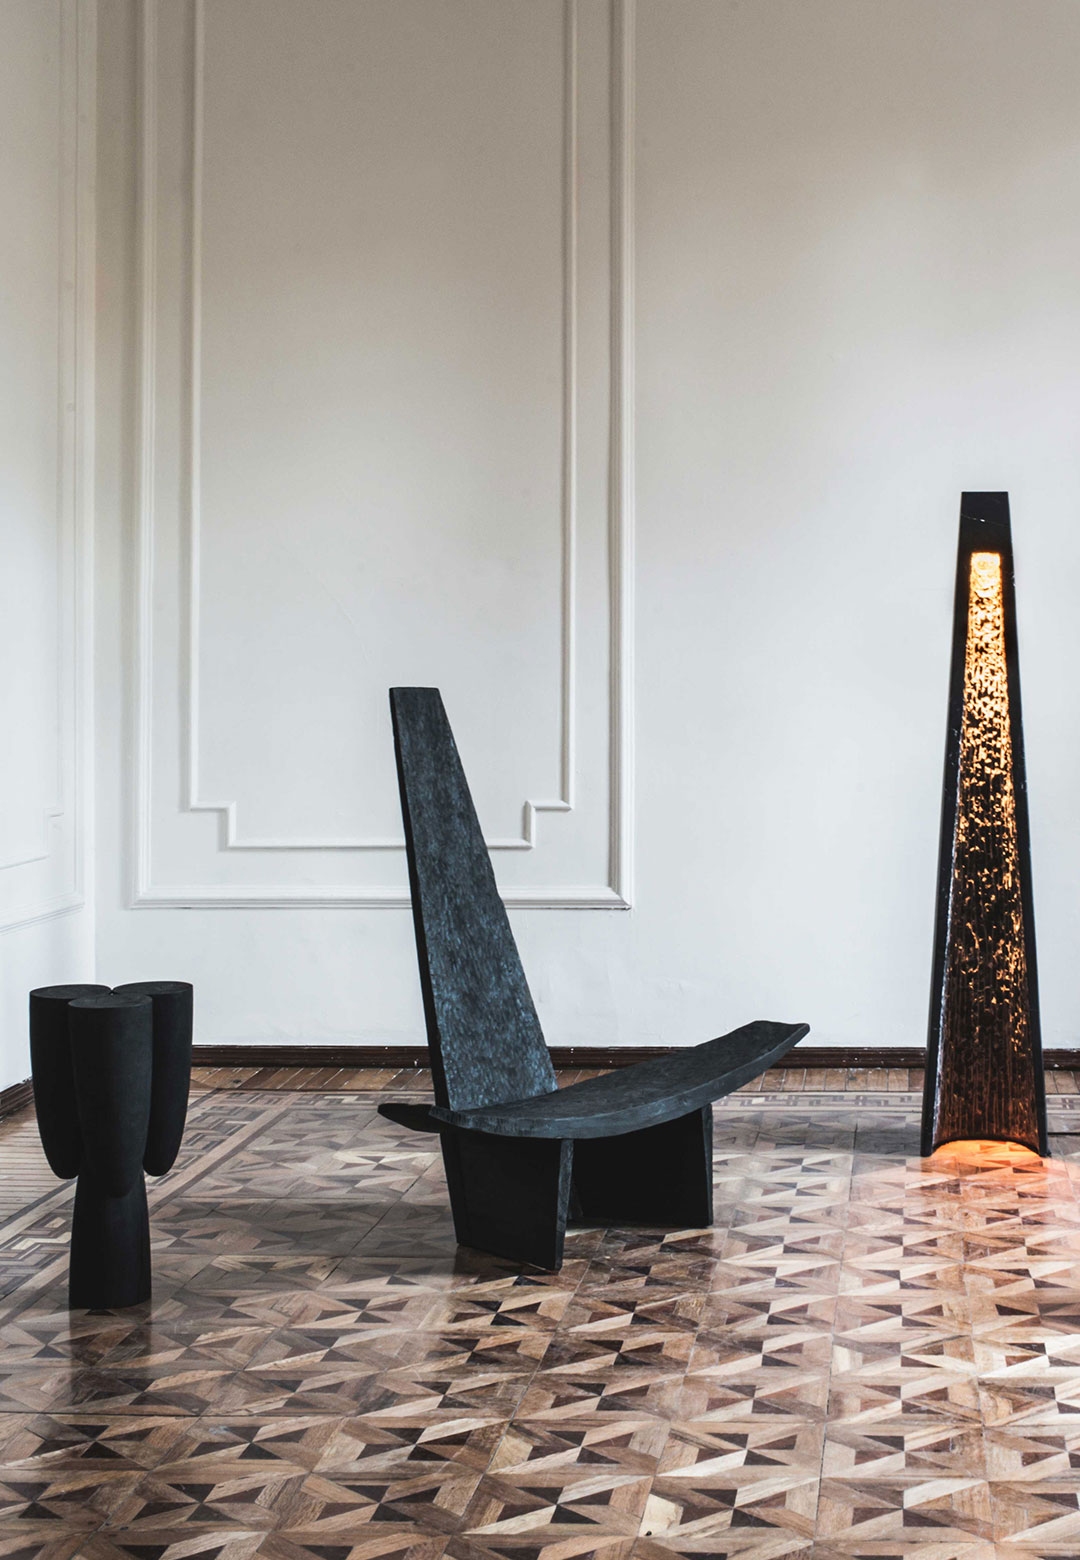 Mexican history permeates contemporary design in EWE's 'Sincretismo' collection